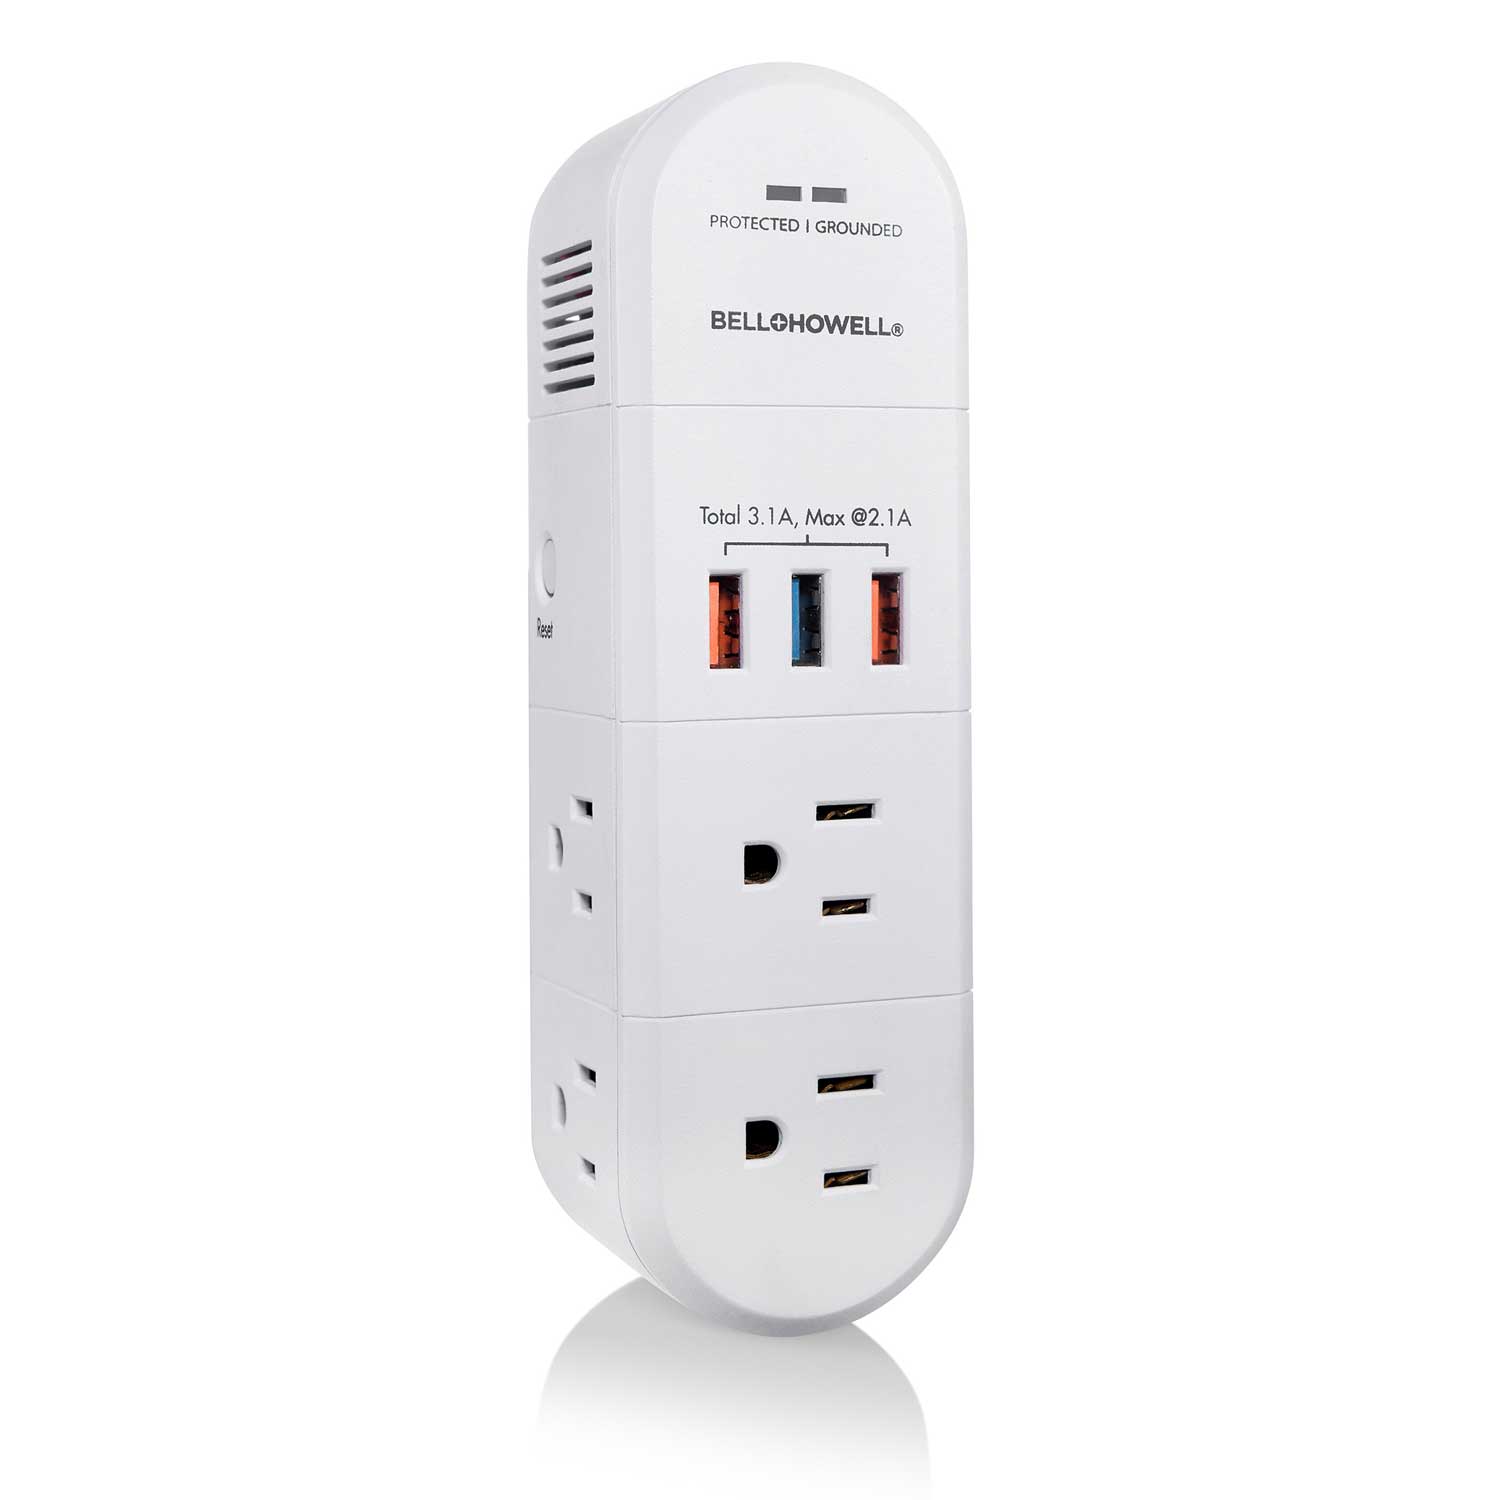 Bell+Howell - Swivel Power - Fast-charging wall power strip with surge protection